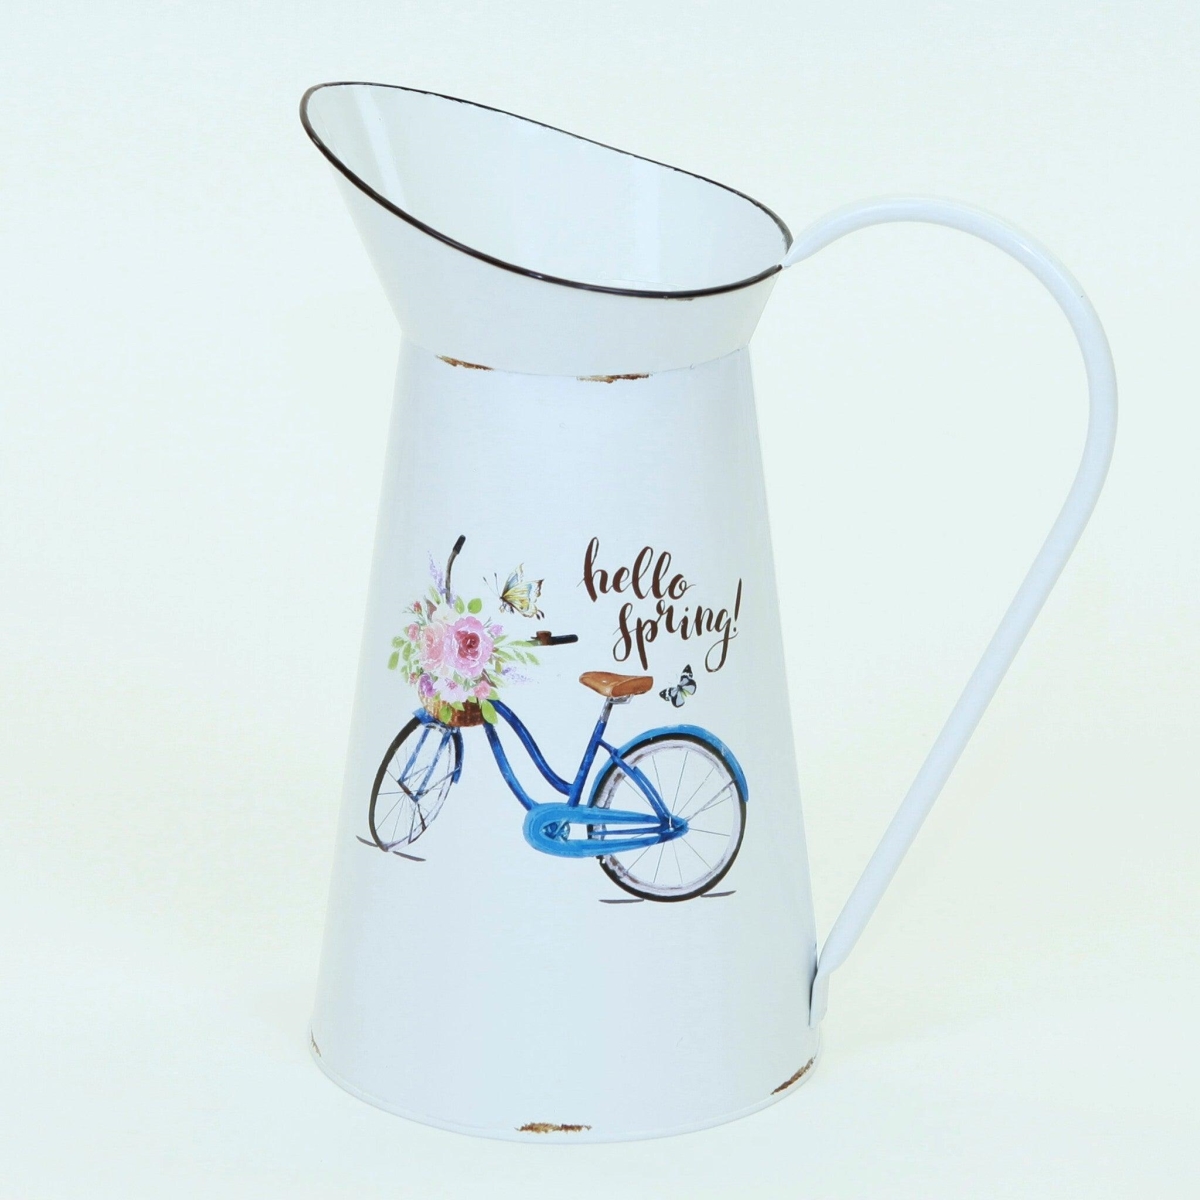 Cocina AI-GA93-428-Q04 Hello Spring White & Blue Bike with Flowers on a Metal Pitcher - Set of 4